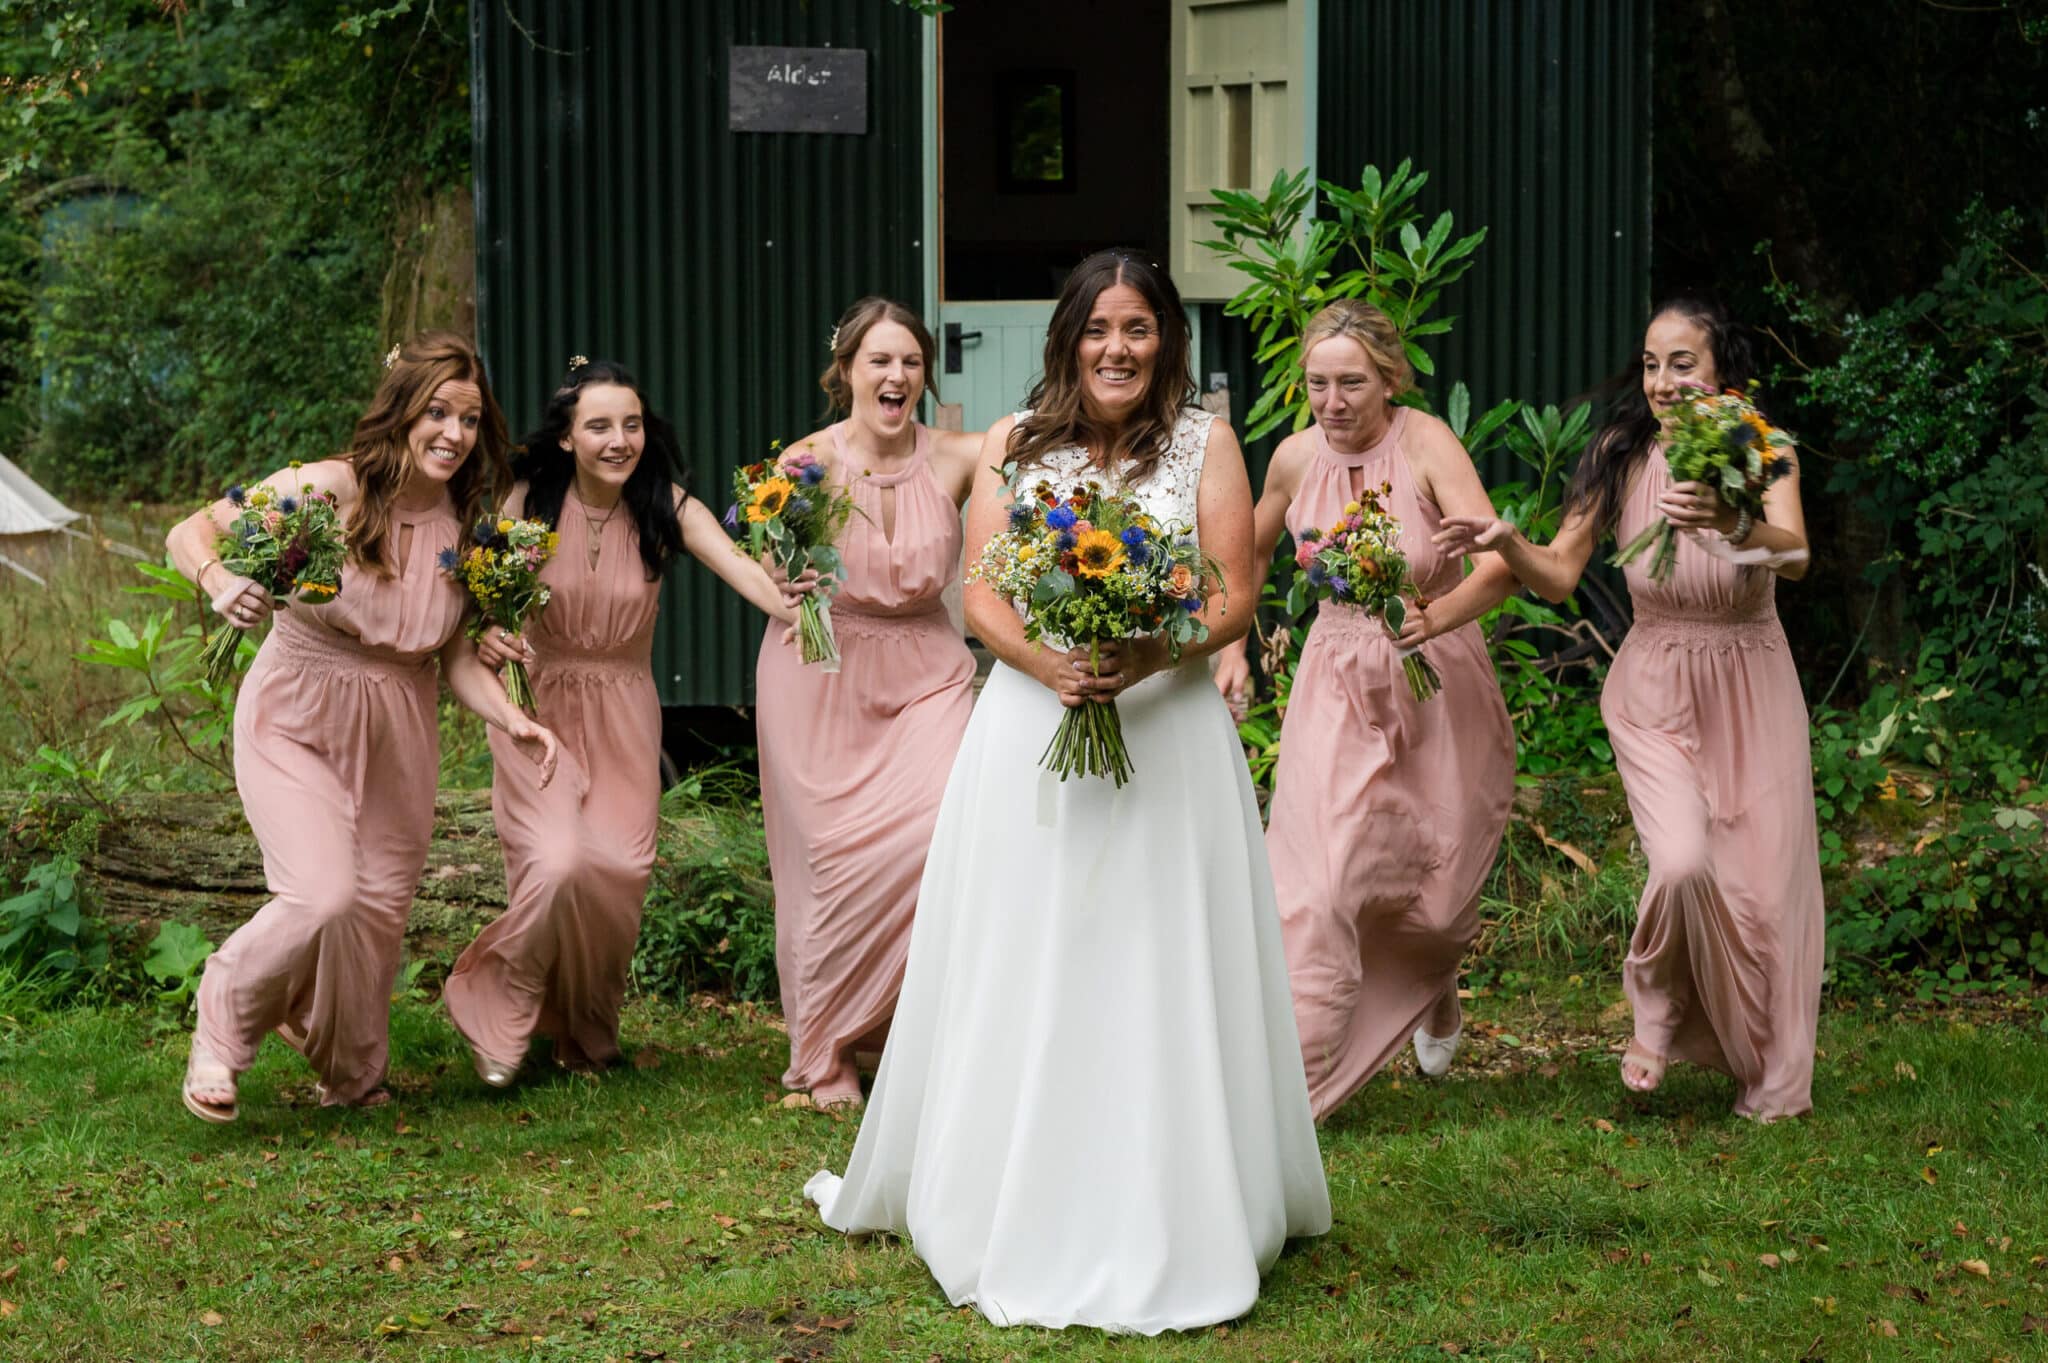 Bridesmaids have fun at Weddings in the Wood in the New Forest